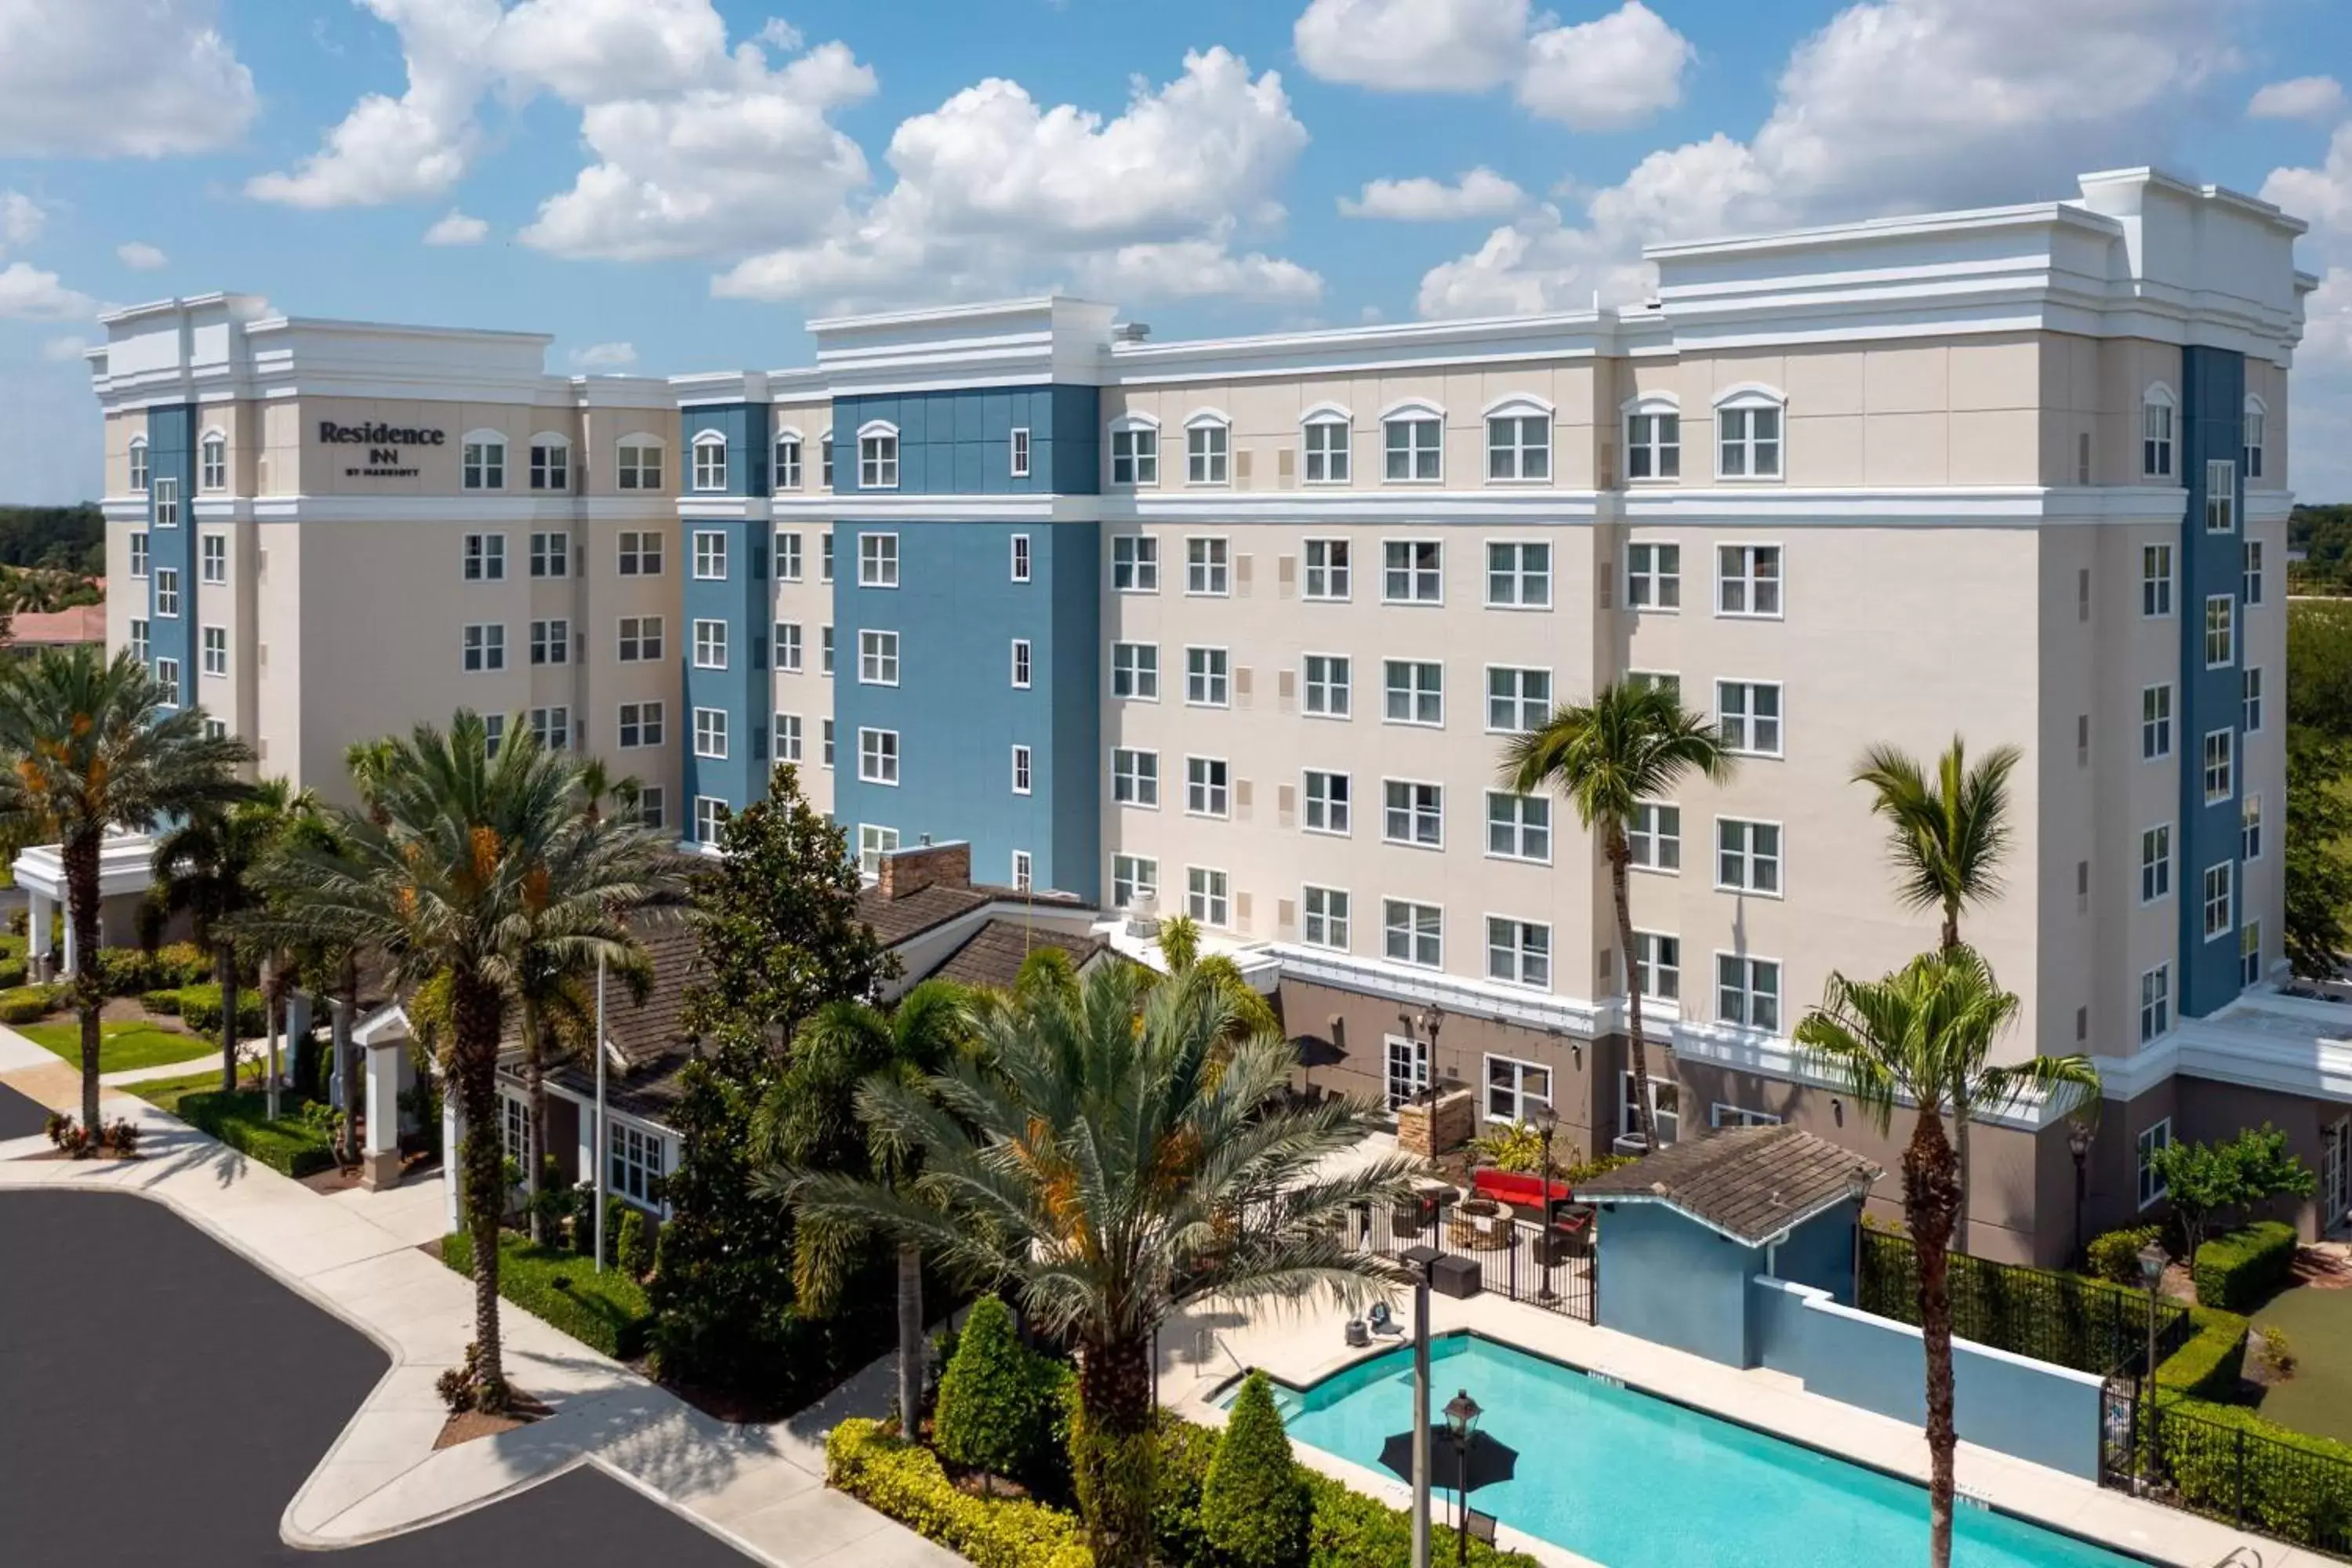 Property building, Pool View in Residence Inn Port St Lucie